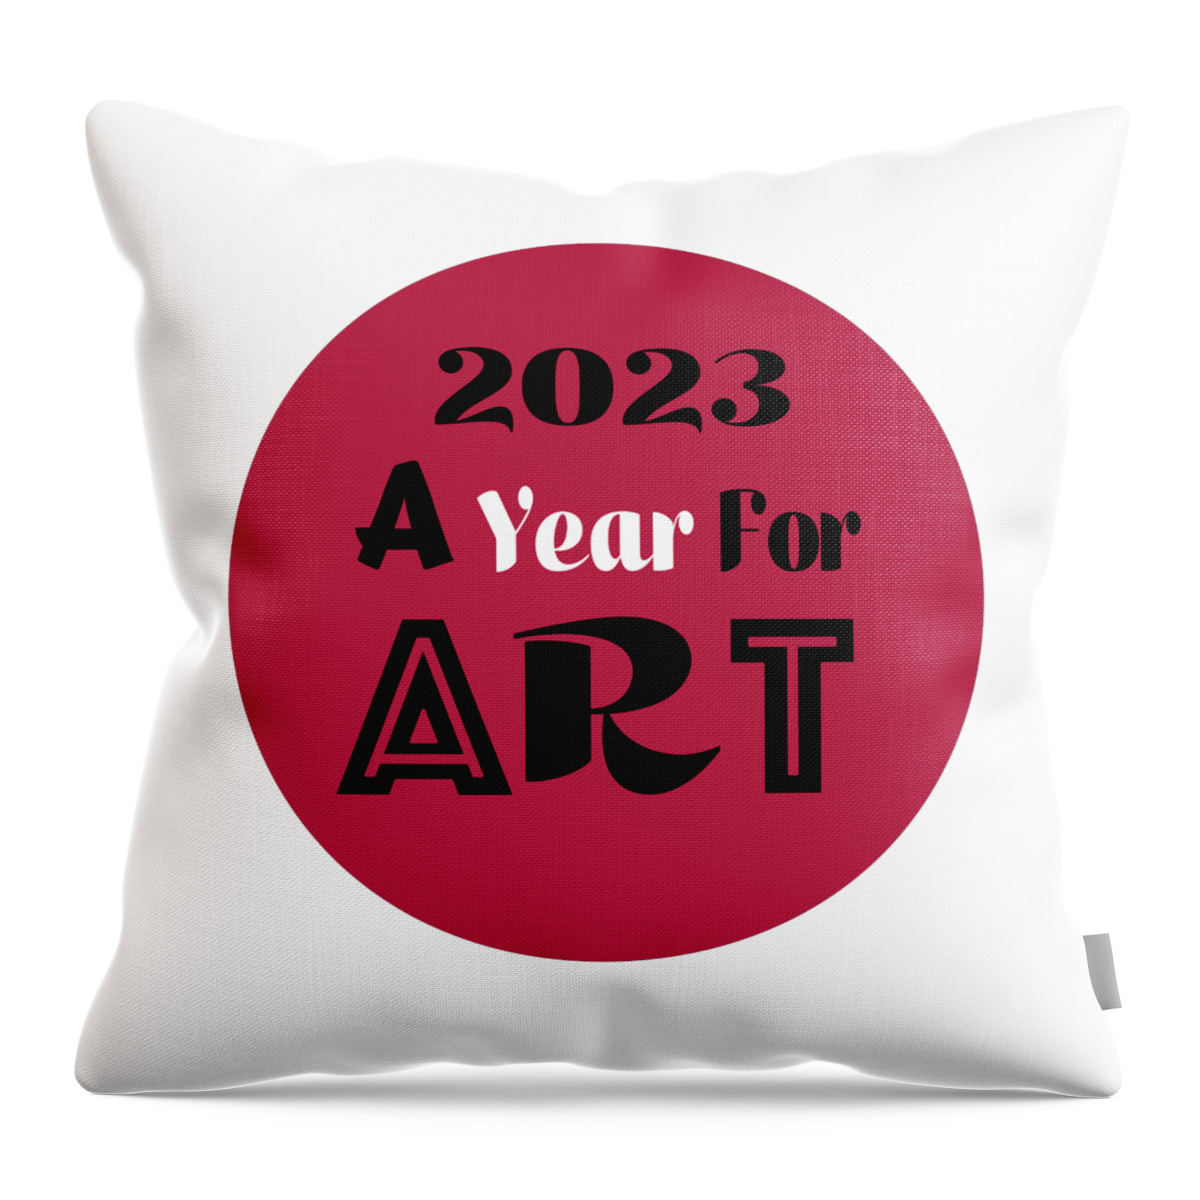 Magenta Throw Pillow featuring the painting A Year For Art - Viva Magenta by Rafael Salazar